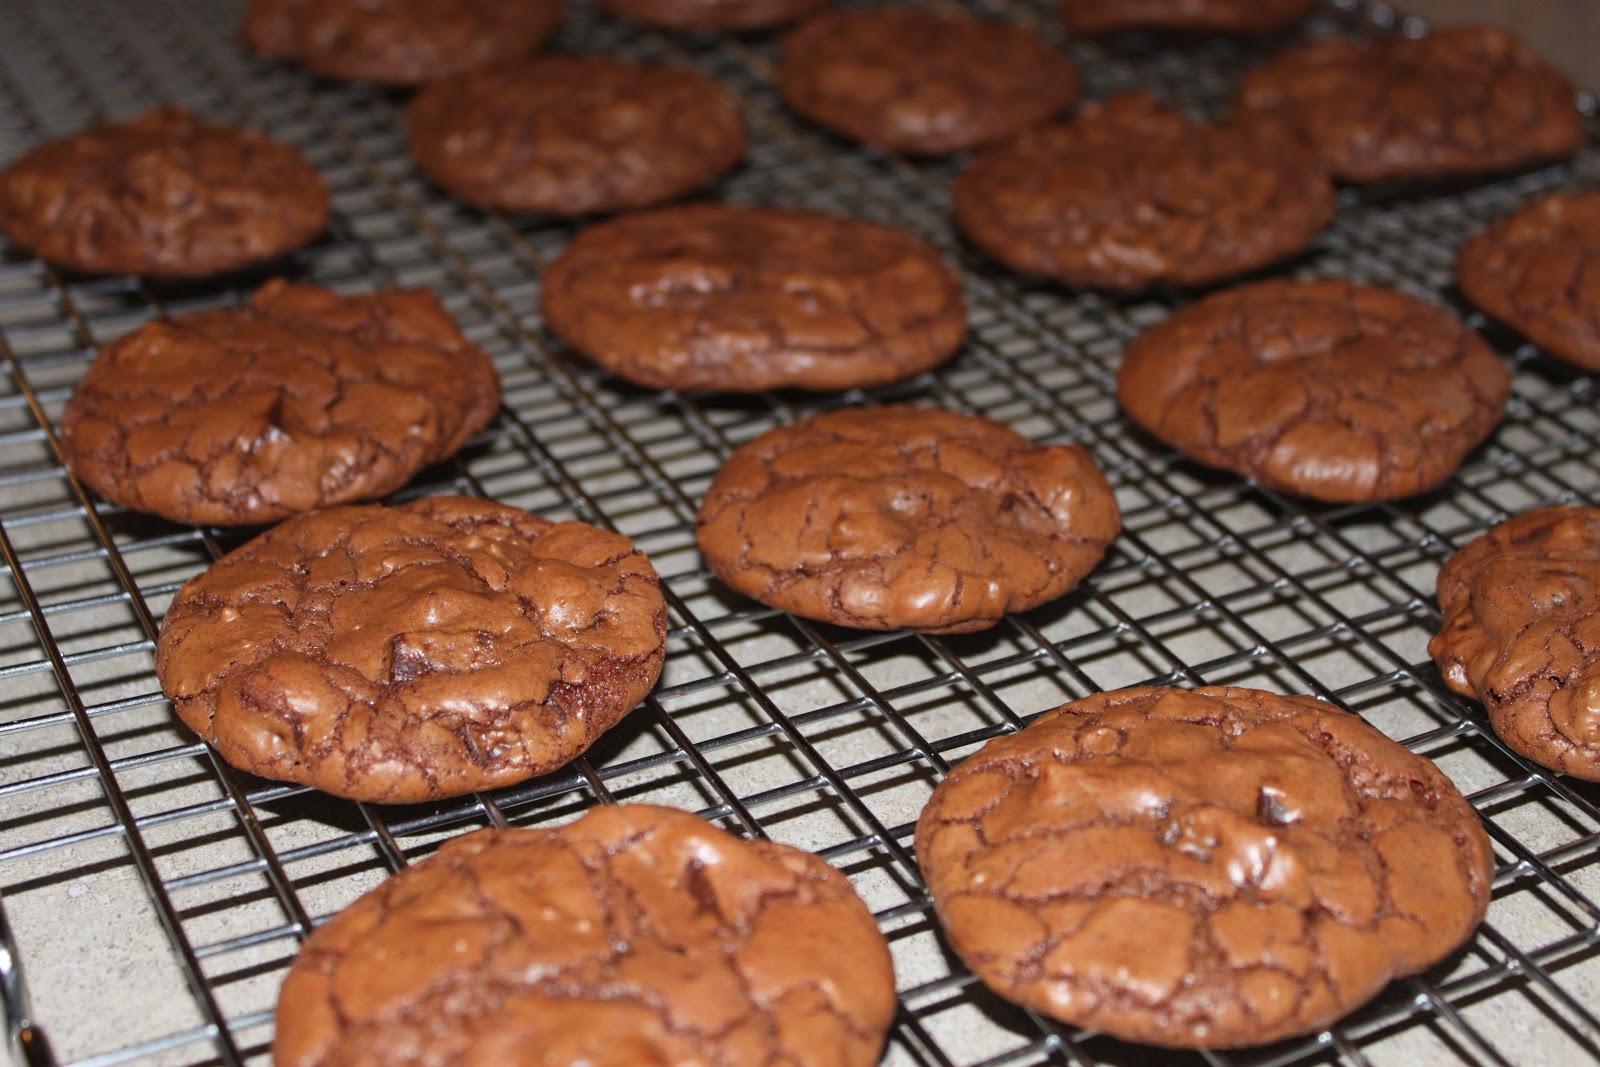 Kelly's Sweet Treats & Delicious Eats: Outrageous Chocolate Cookies